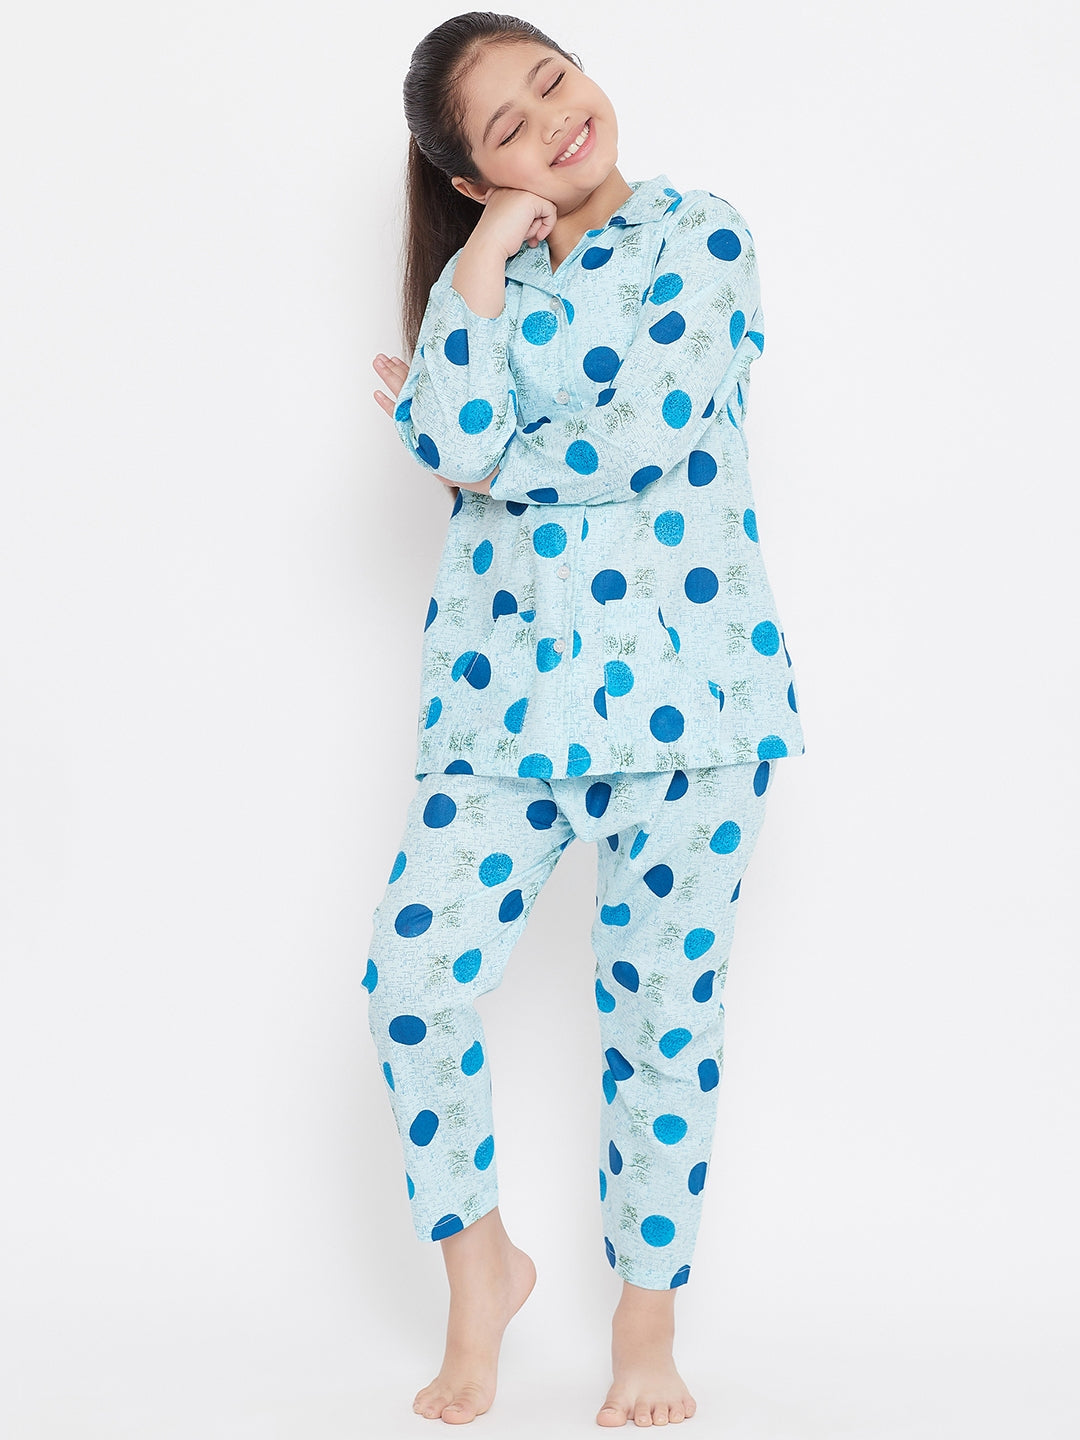 Girl's Blue & Turquoise Printed Rayon Nightsuit (Pack of 2) - NOZ2TOZ KIDS